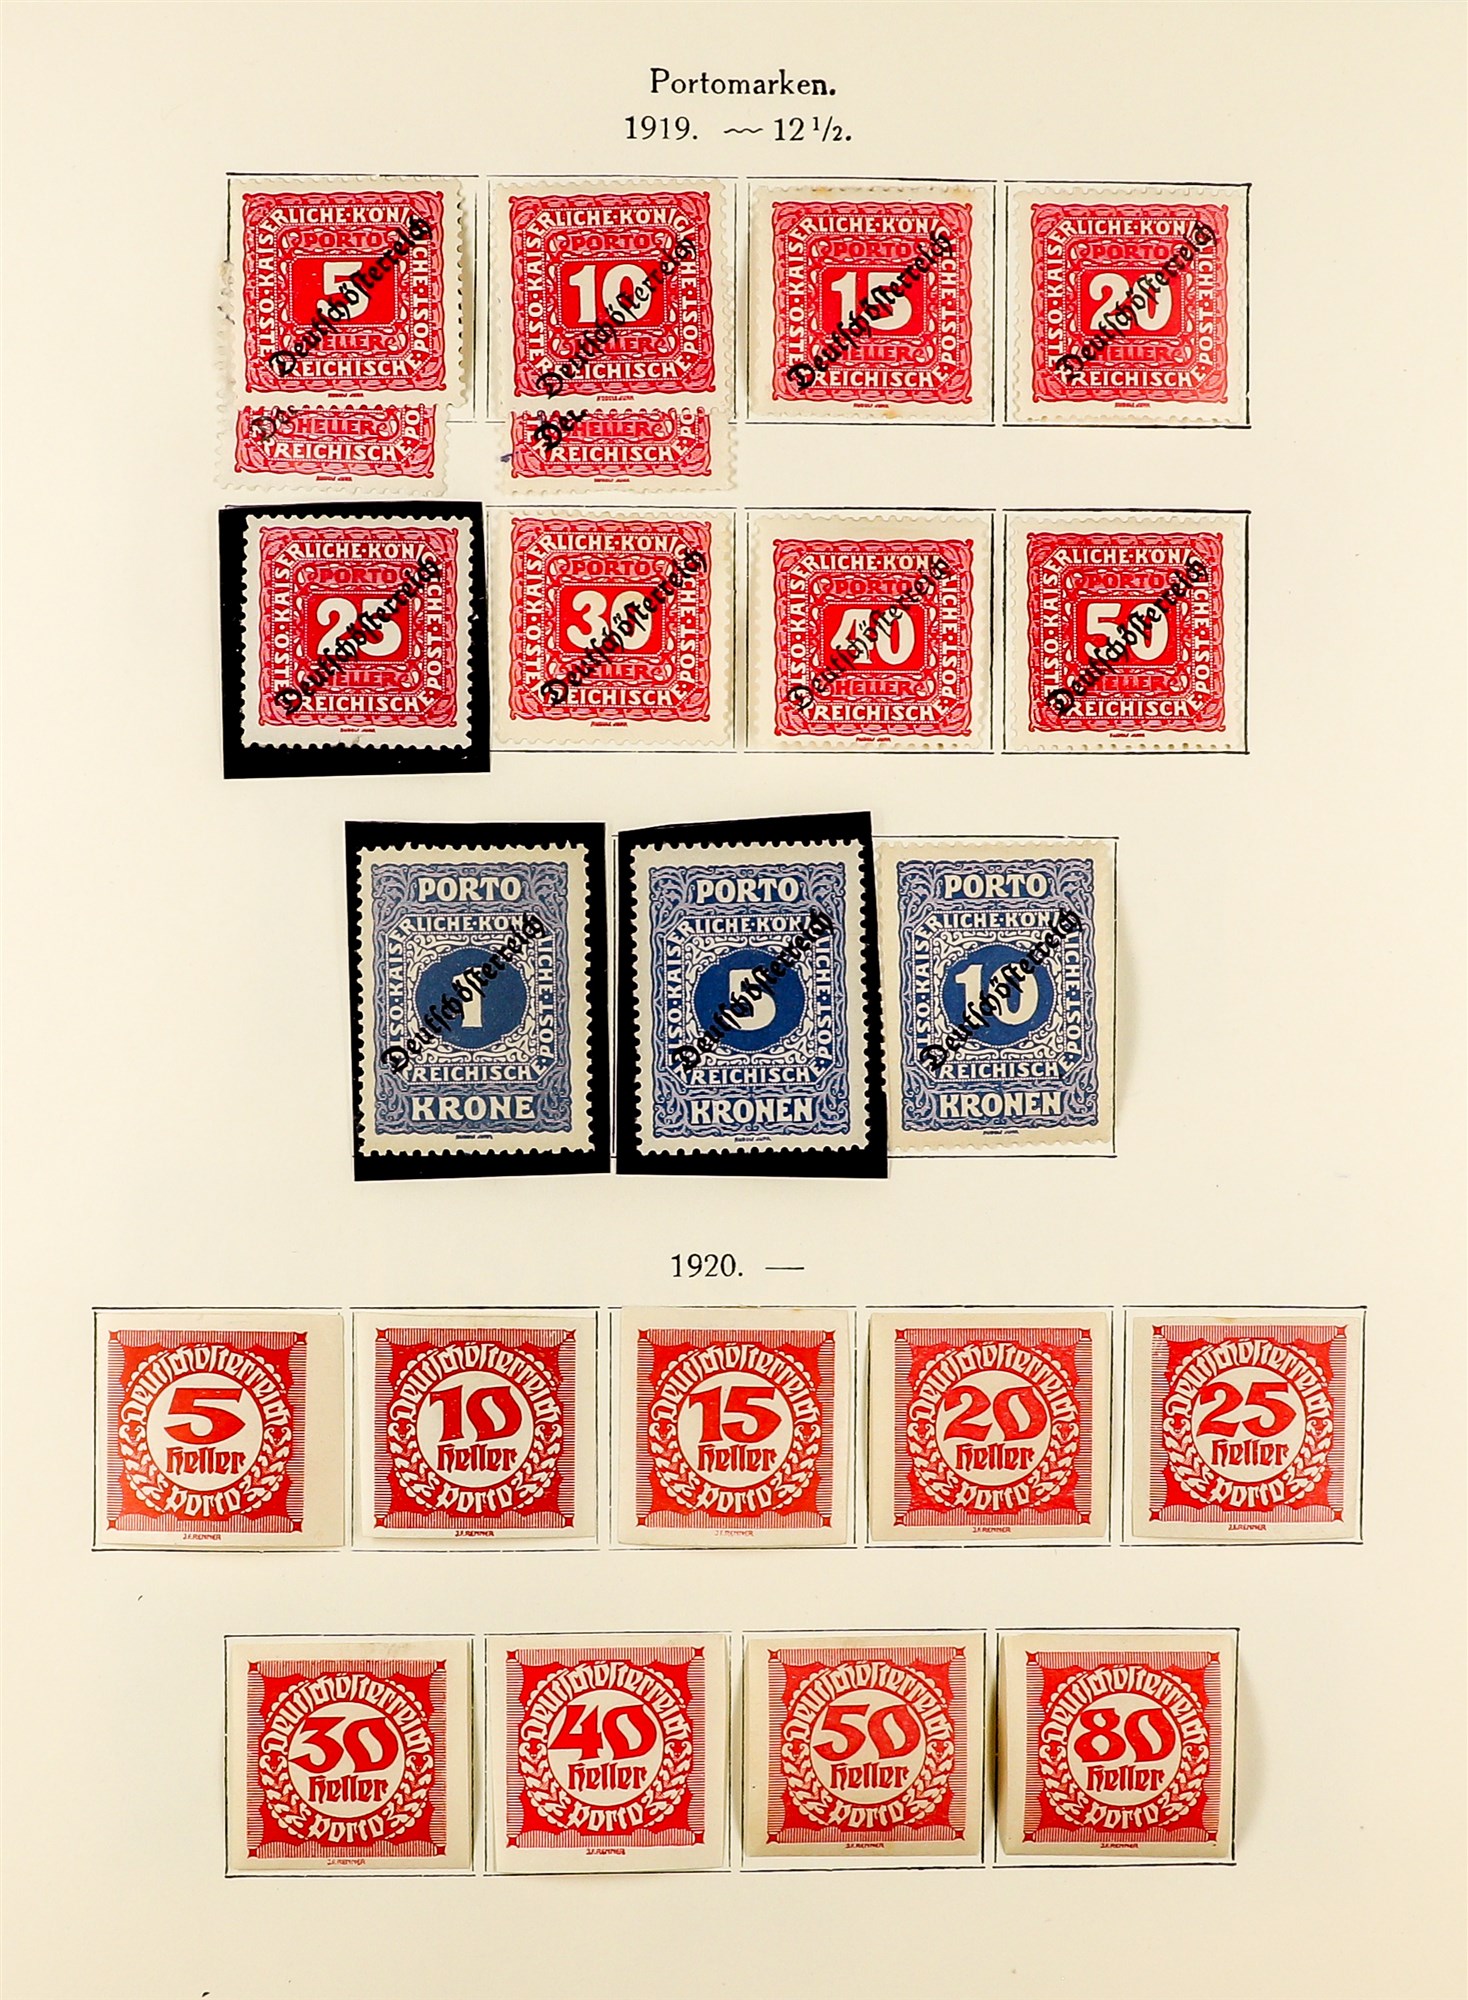 AUSTRIA 1918 - 1937 REPUBLIC COLLECTION of chiefly mint / never hinged mint sets in album incl - Image 9 of 22